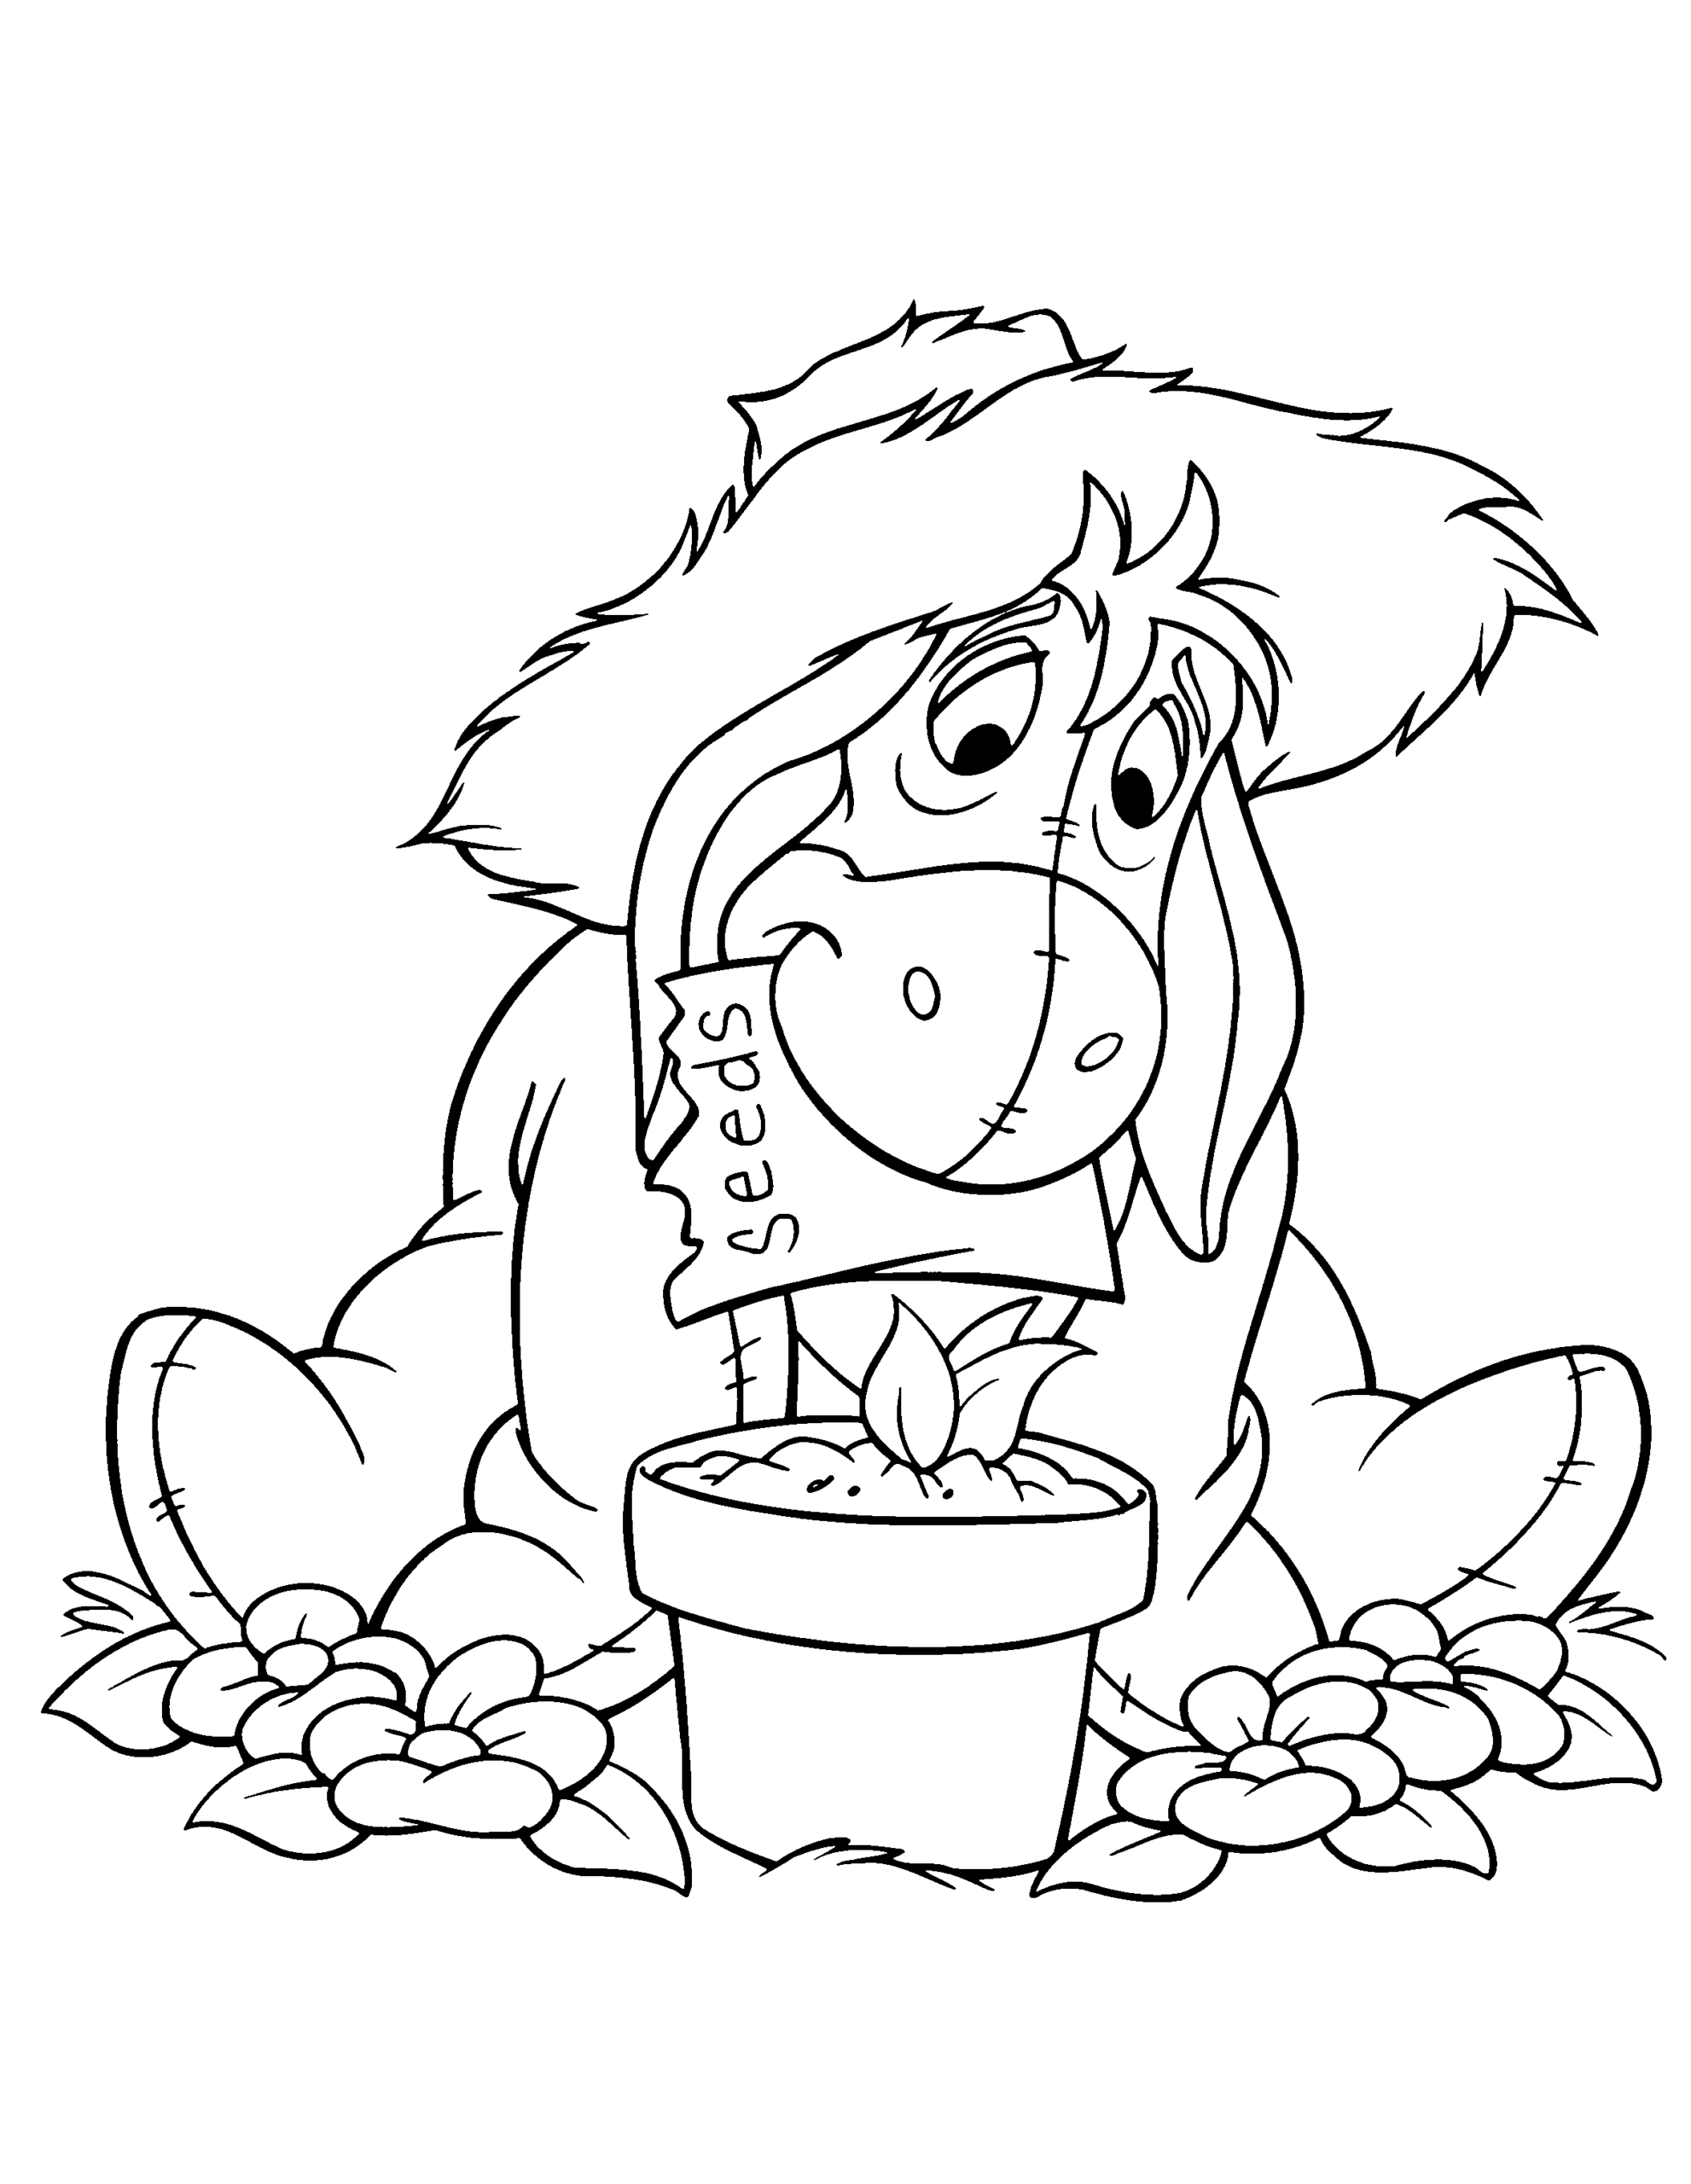 Winnie the Pooh Coloring Pages Cartoons winnie the pooh 108 Printable 2020 7087 Coloring4free